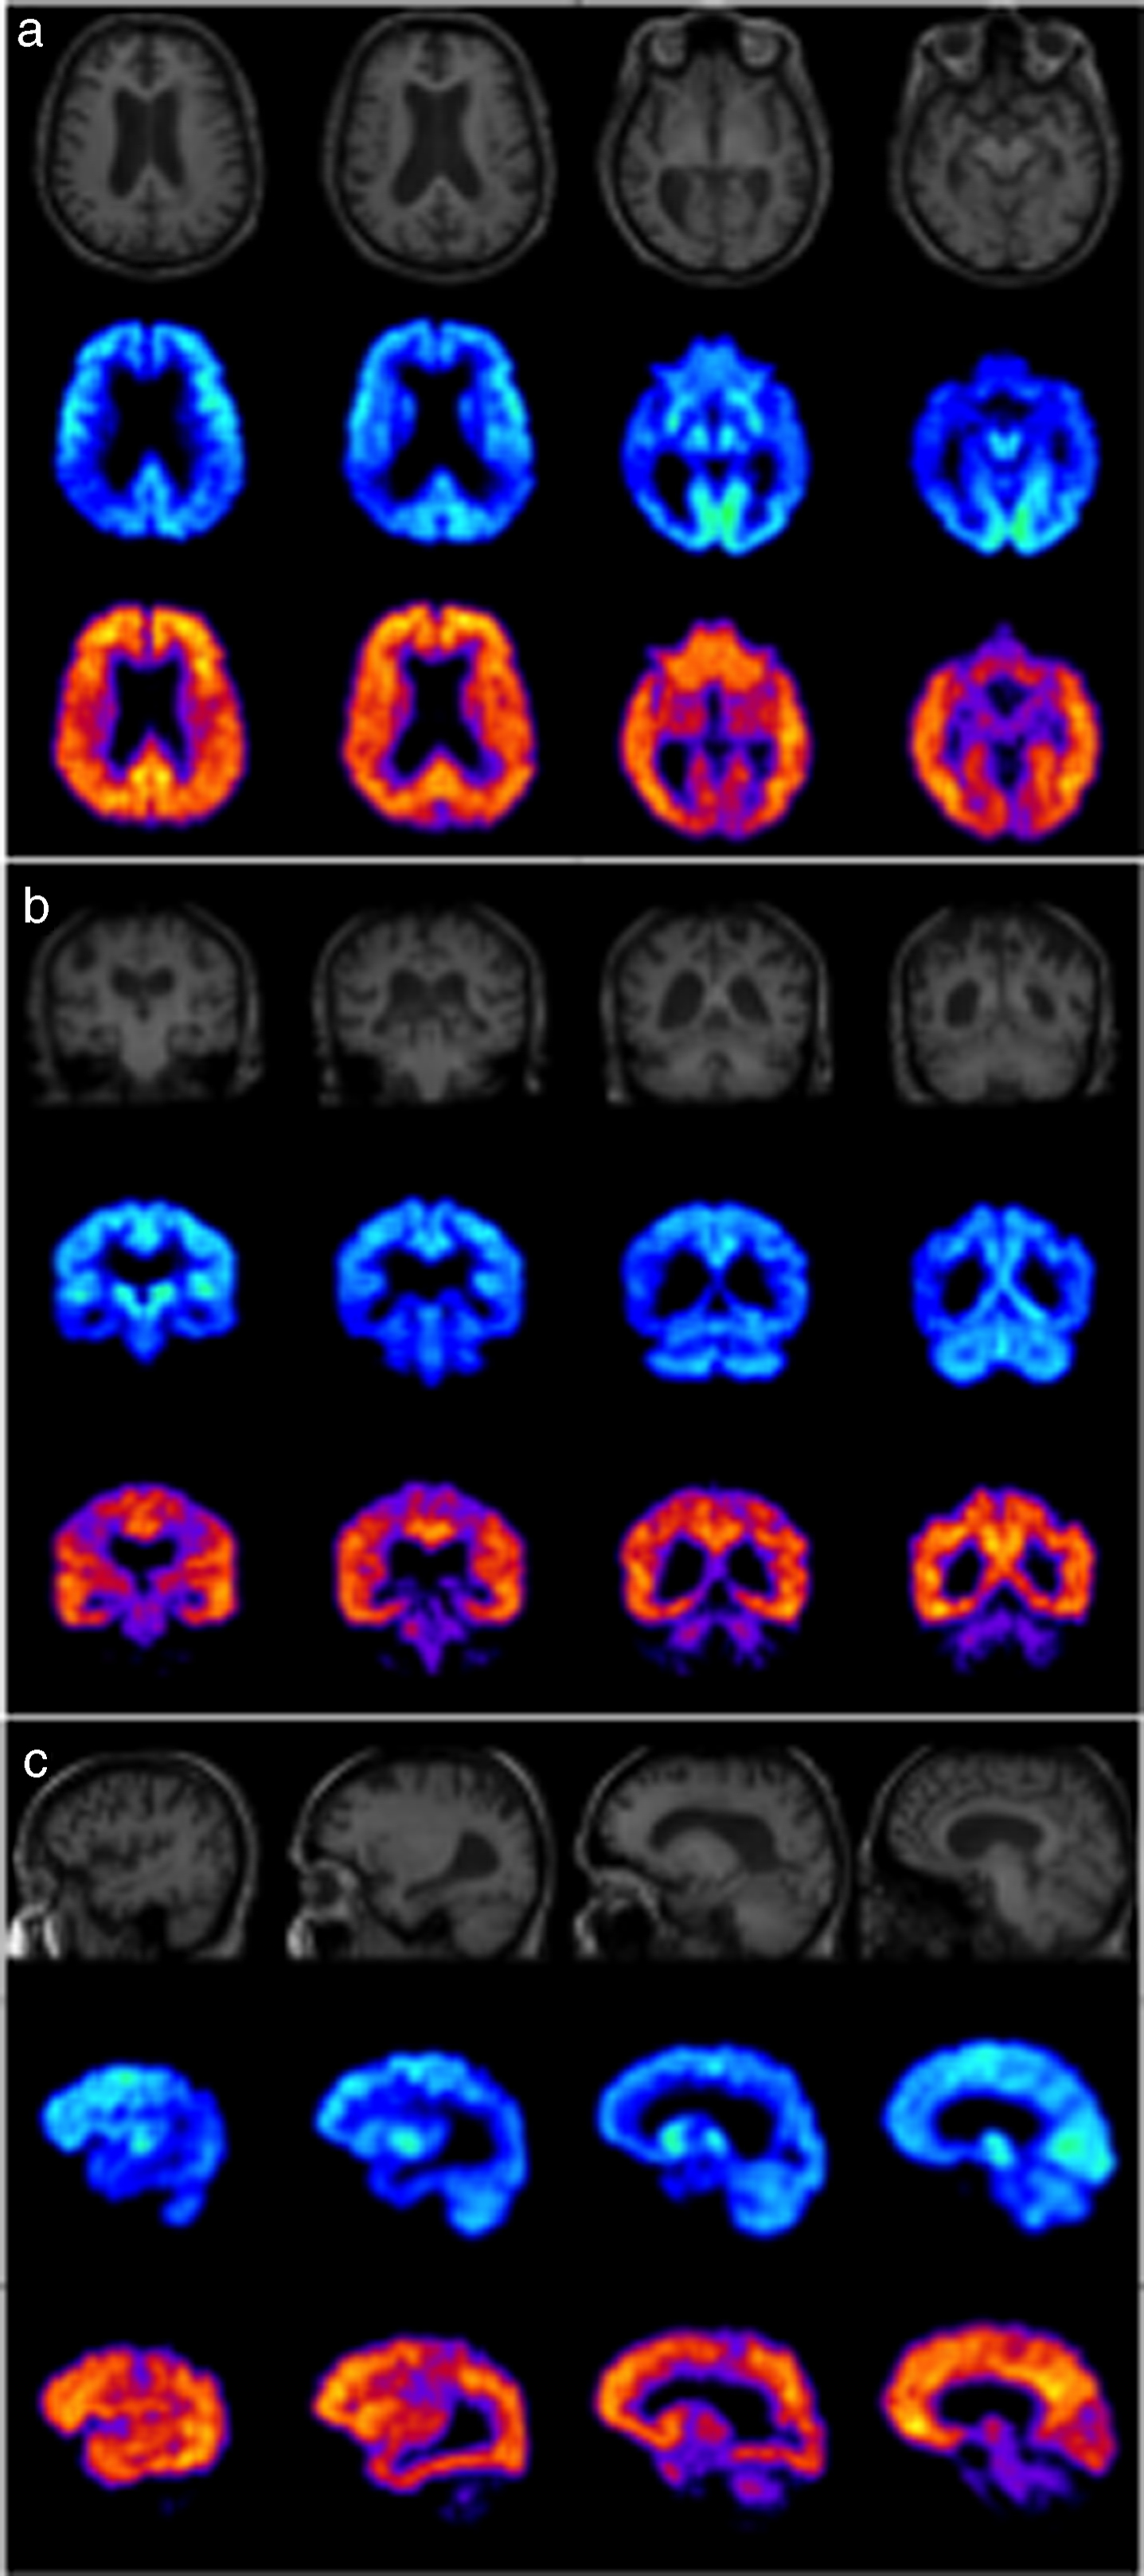 MRI (top), FDG-PET (middle), and PiB-PET (bottom) images of a typical AD case in axial (a), coronal (b) and sagittal (c) planes showing hypometabolism in parietal and temporal lobes in FDG-PET and extensive cortical amyloid deposition in PiB-PET.